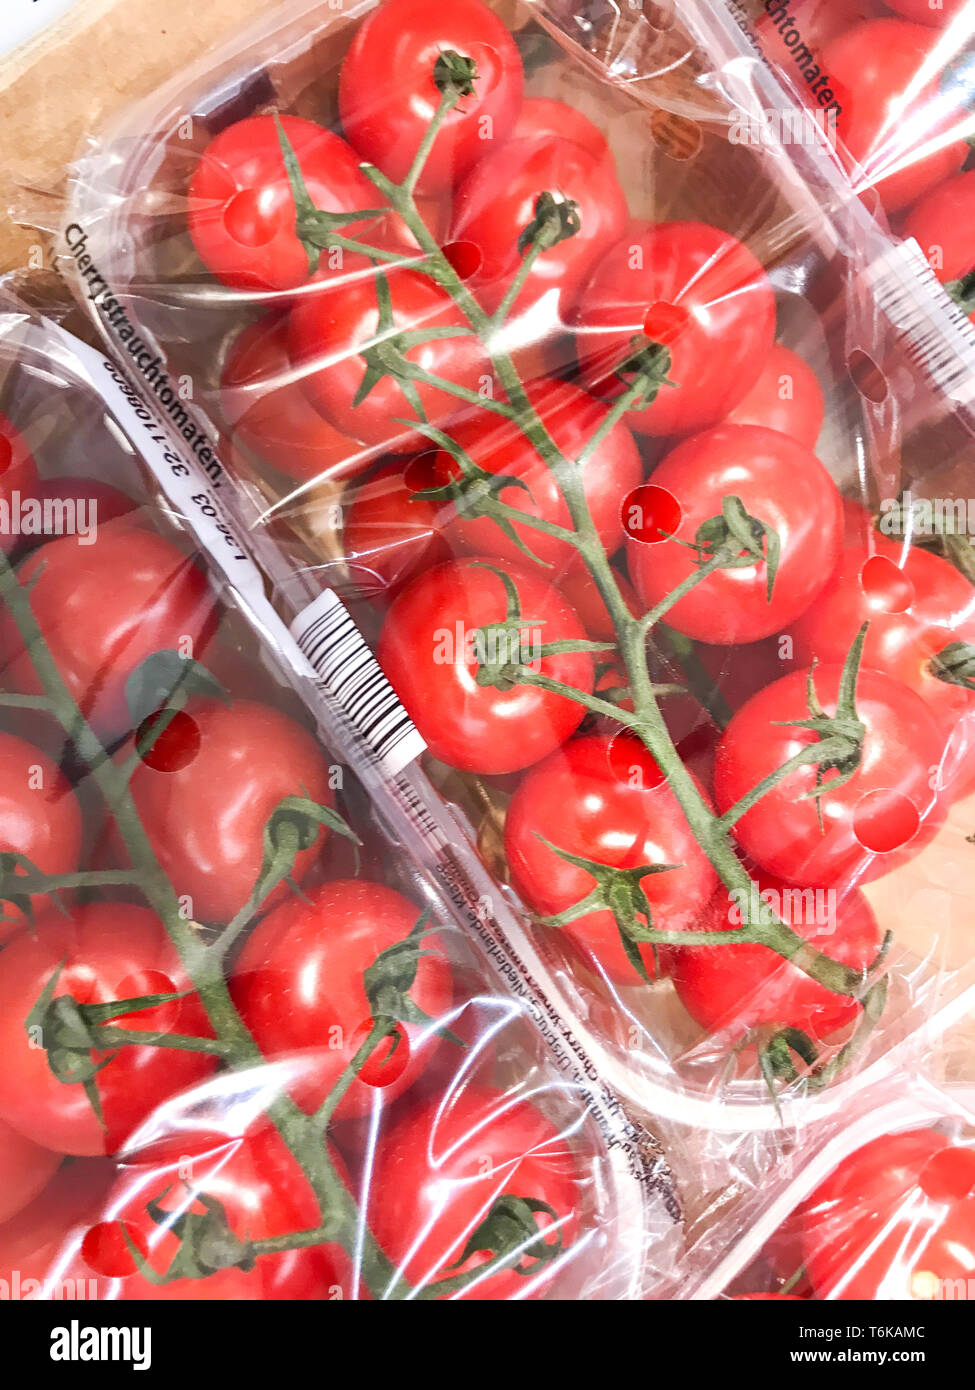 Red cherry tomatoes in the supermarket Stock Photo - Alamy